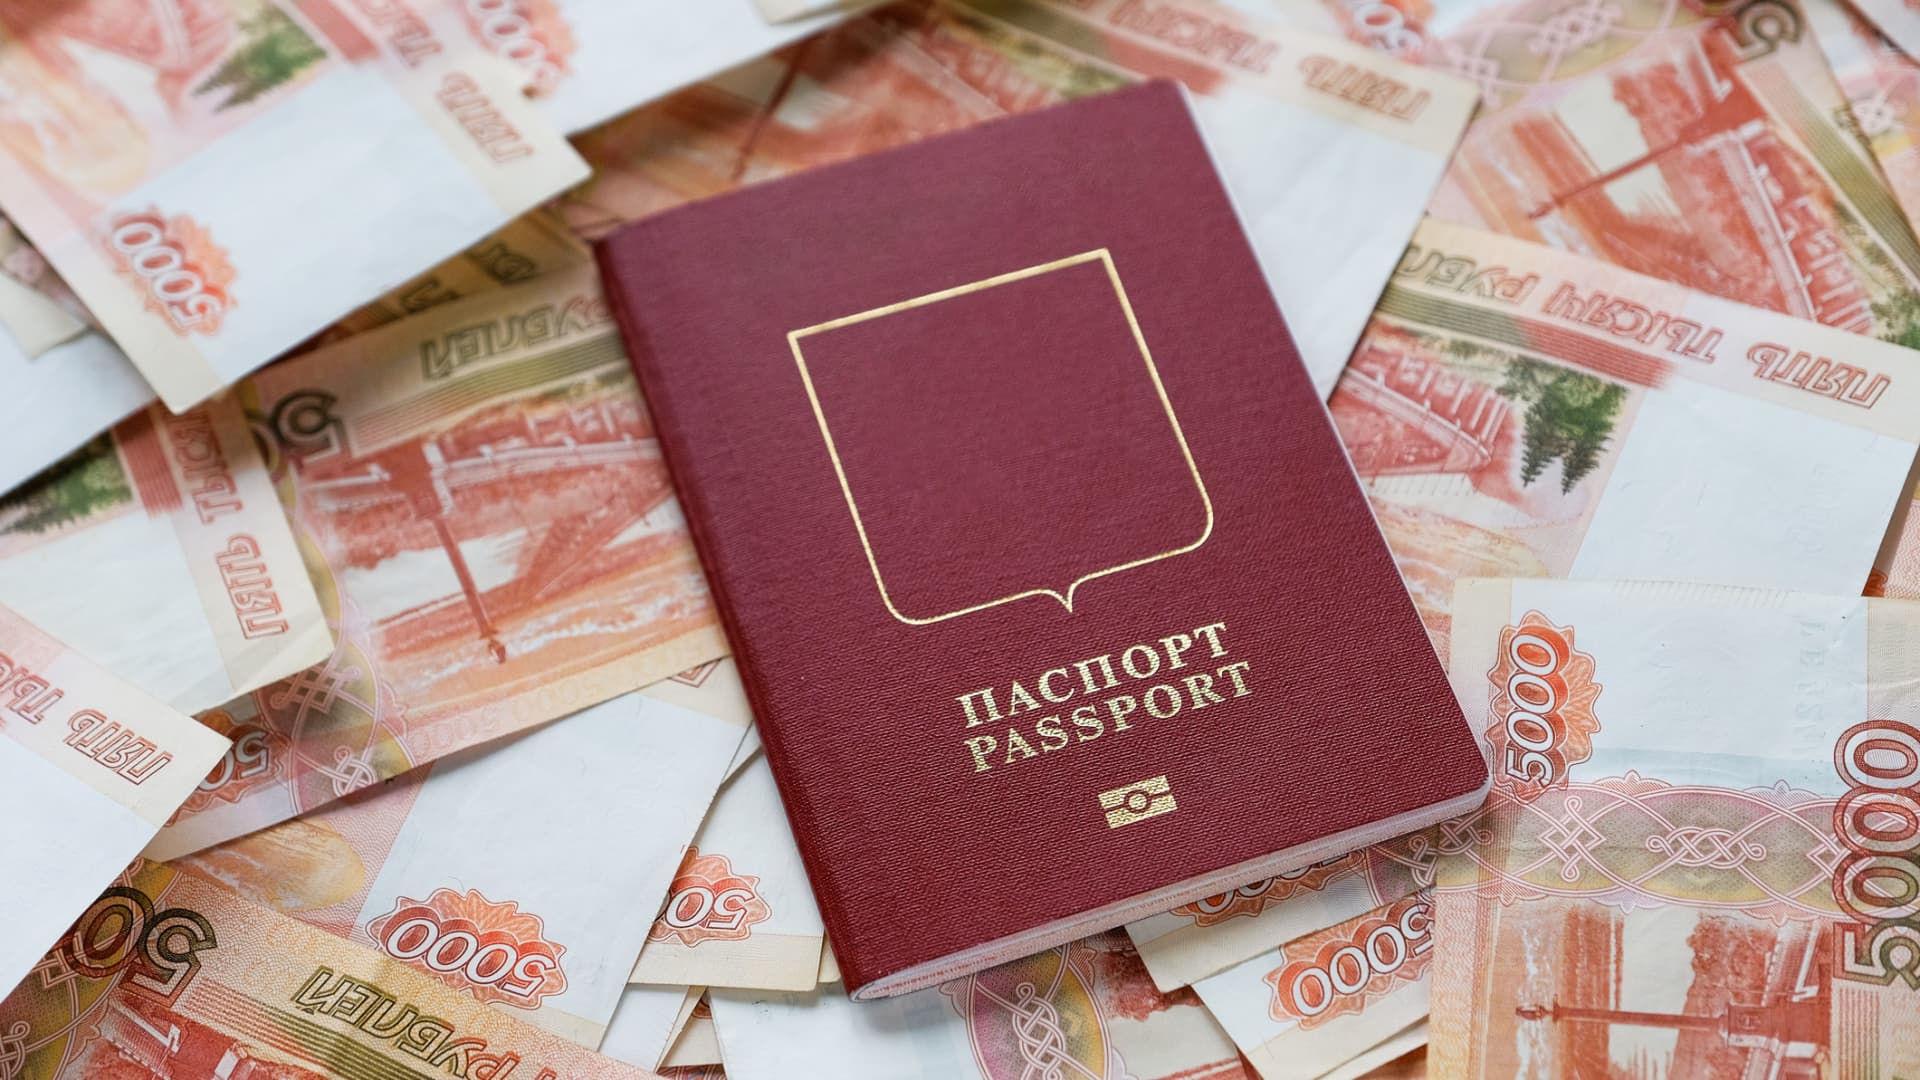 An illustration showing a Russian Passport and money.